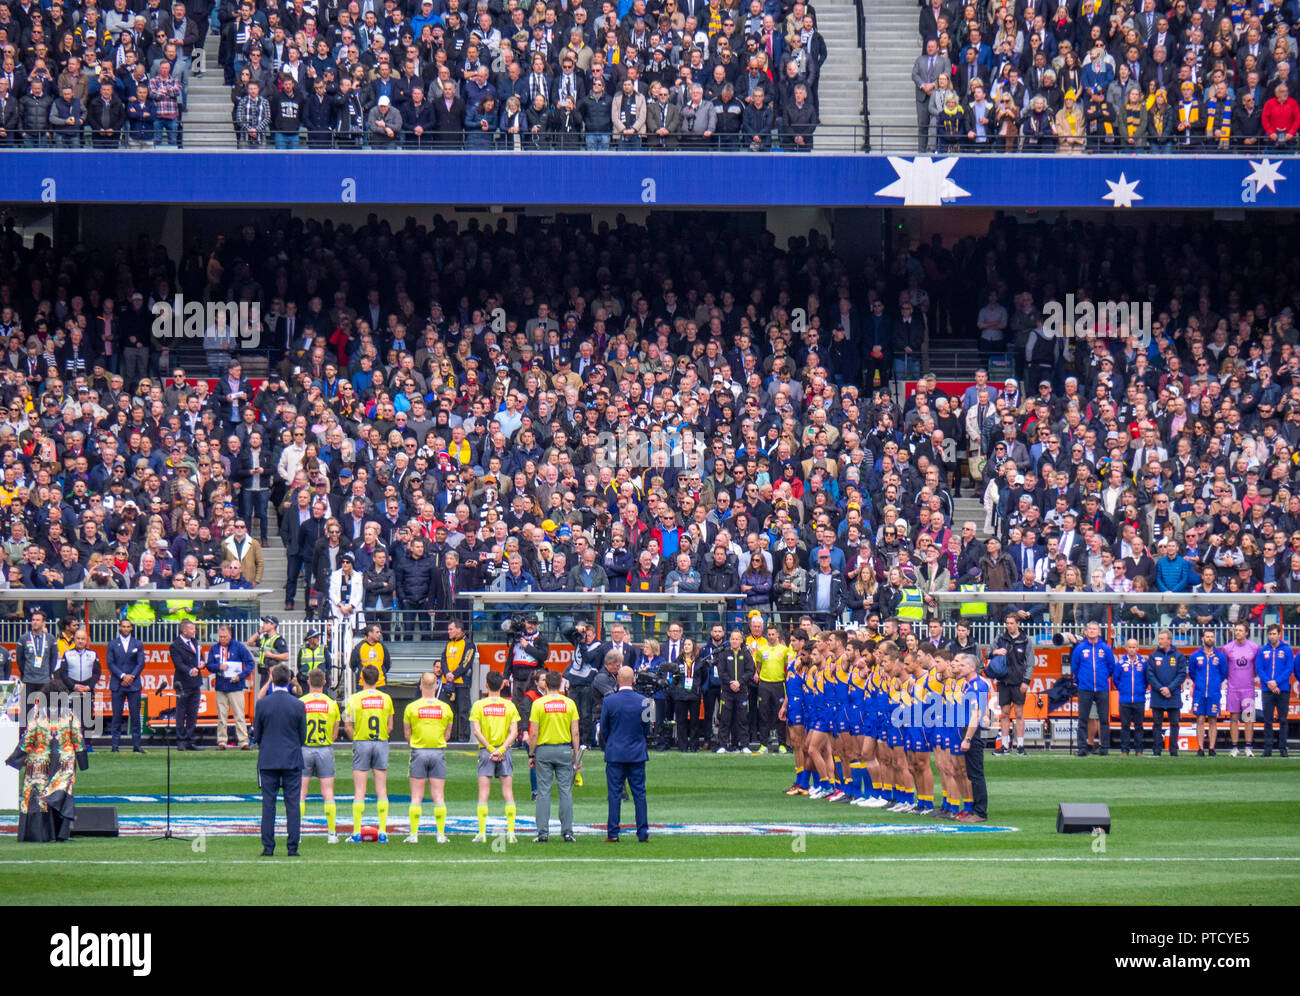 Umpires, West Coast Eagles team fans and supporters at 2018 AFL Grand Final at MCG Melbourne Victoria Australia. Stock Photo